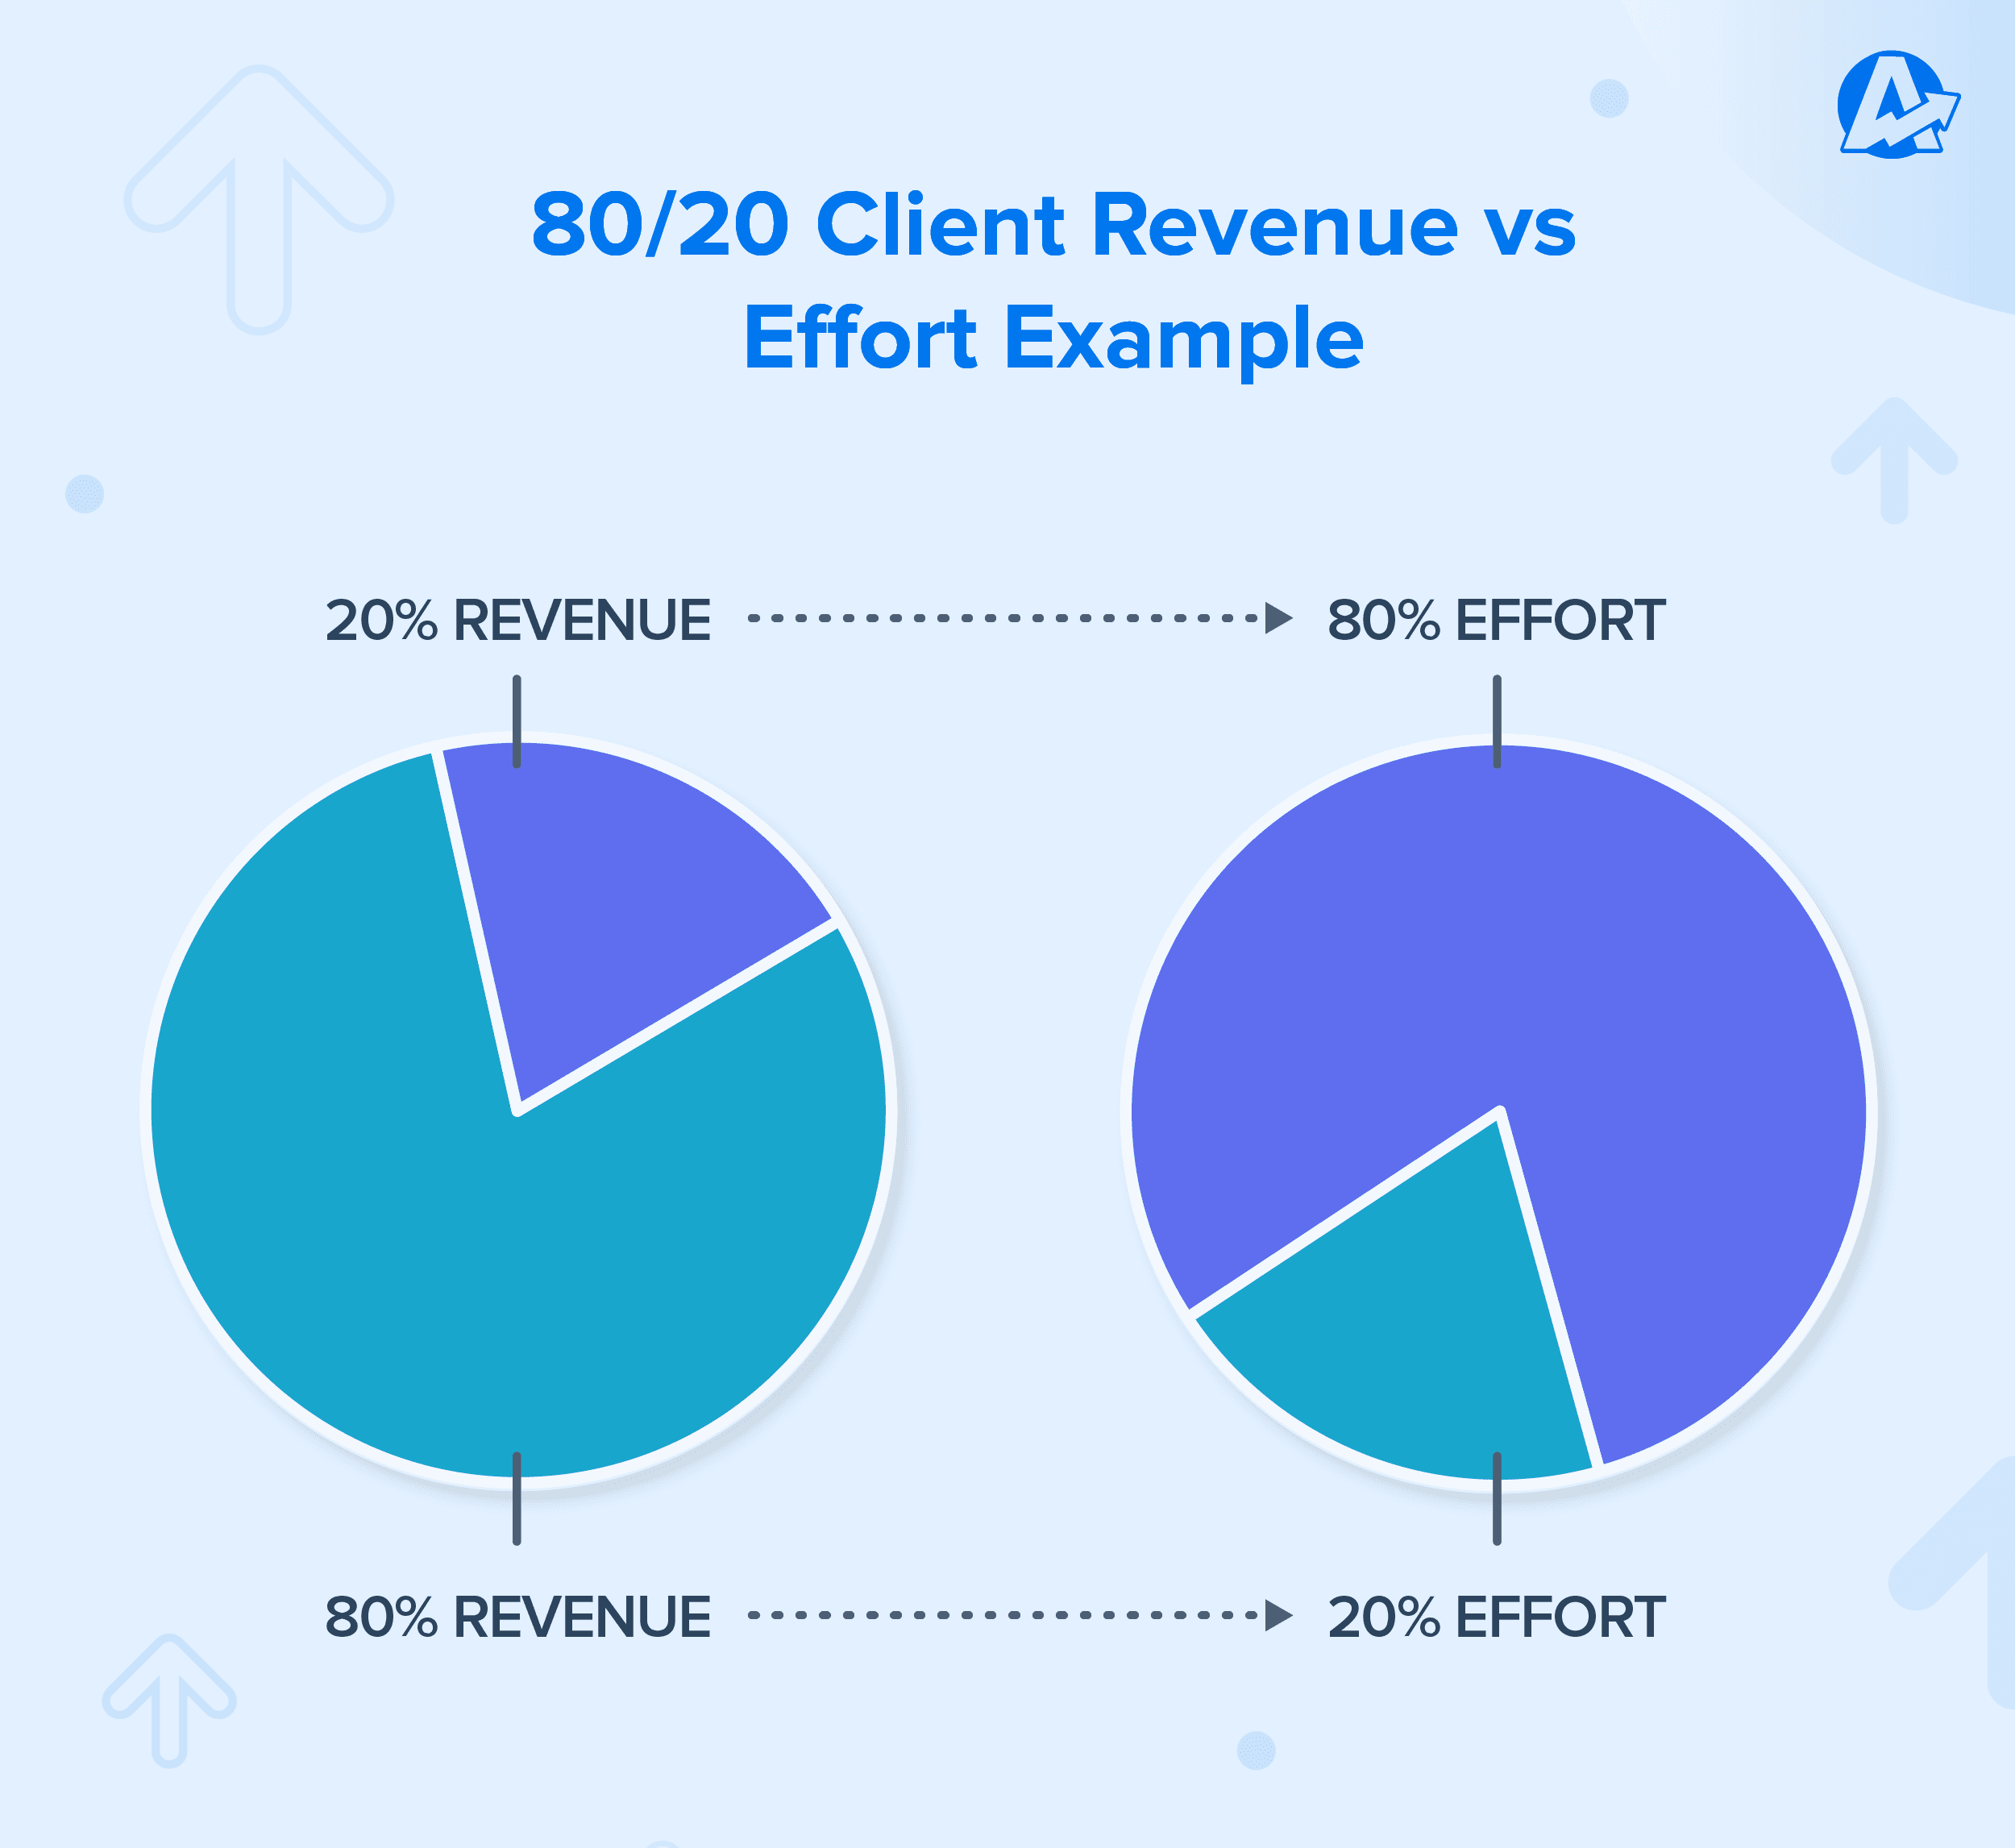 example of the 80-20 rule for revenue, with the pareto principle show that 80% of revenue comes from 20% effort 